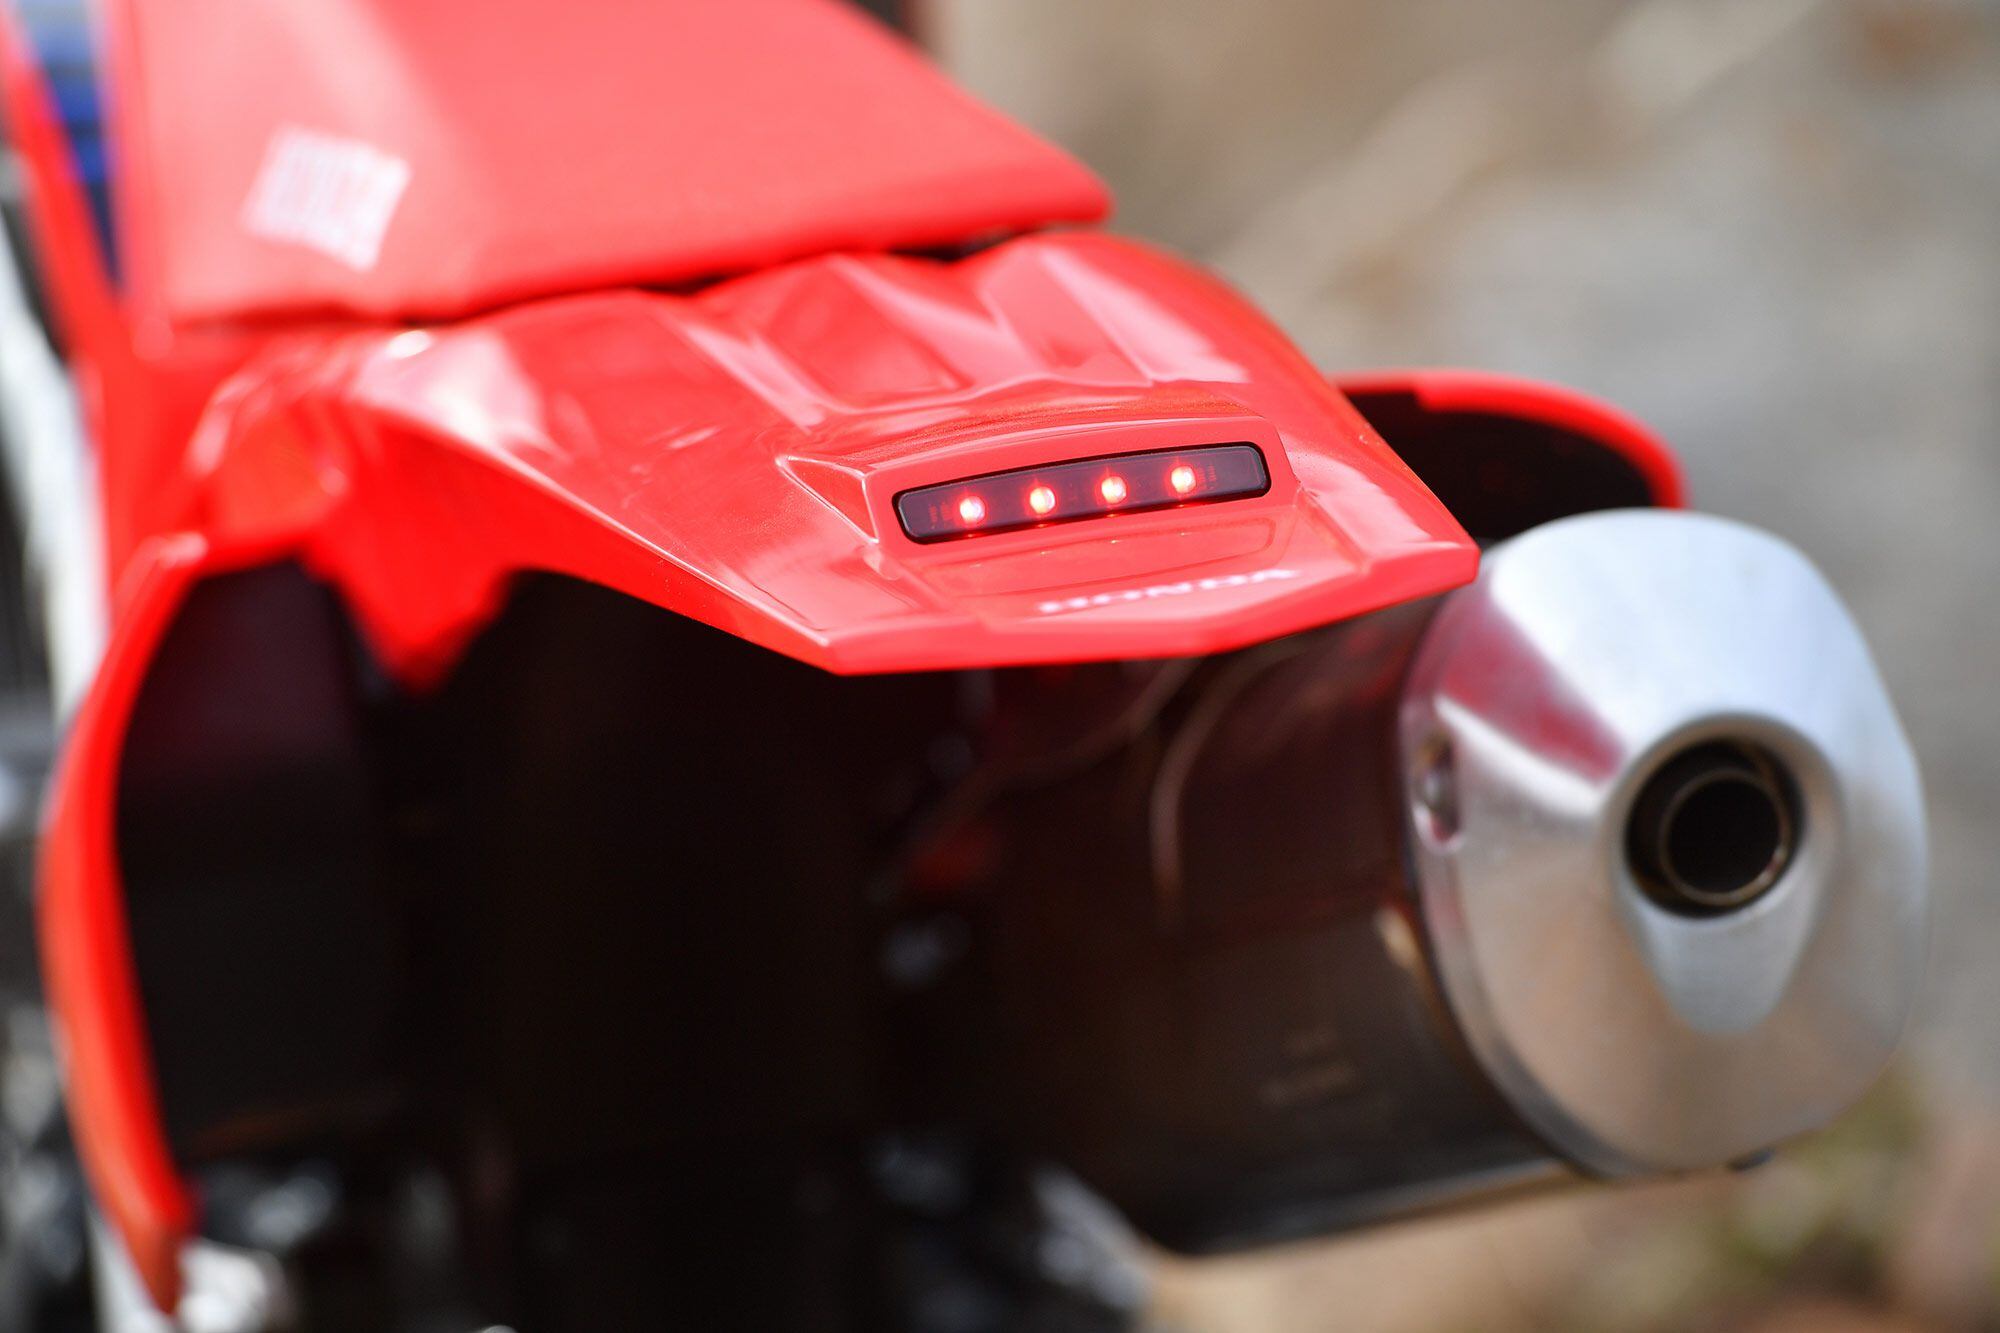 LED taillight in action. With a halogen headlight up front, only the CRF450X and CRF450RL are truly night-worthy.